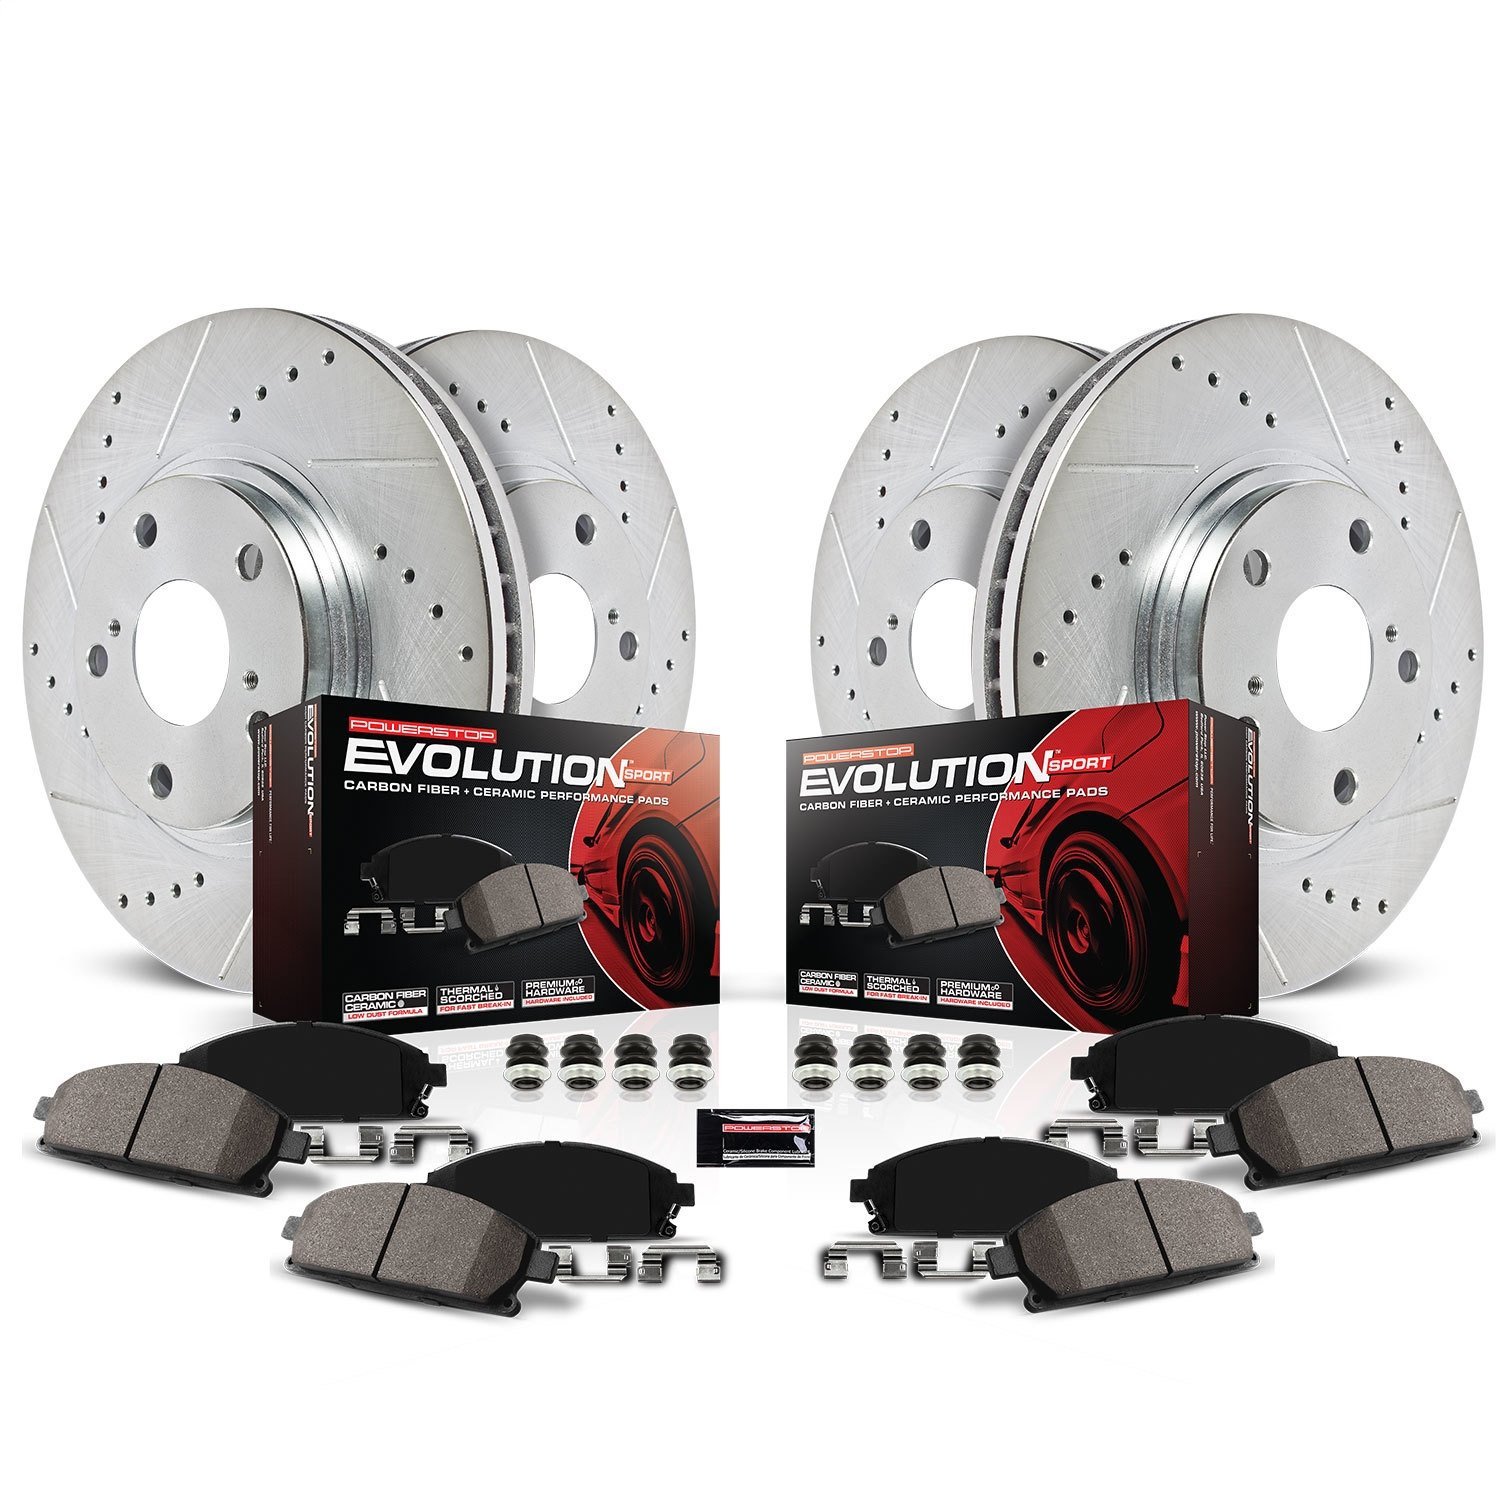 High Performance Brake Upgrade Kit Cross-Drilled and Slotted